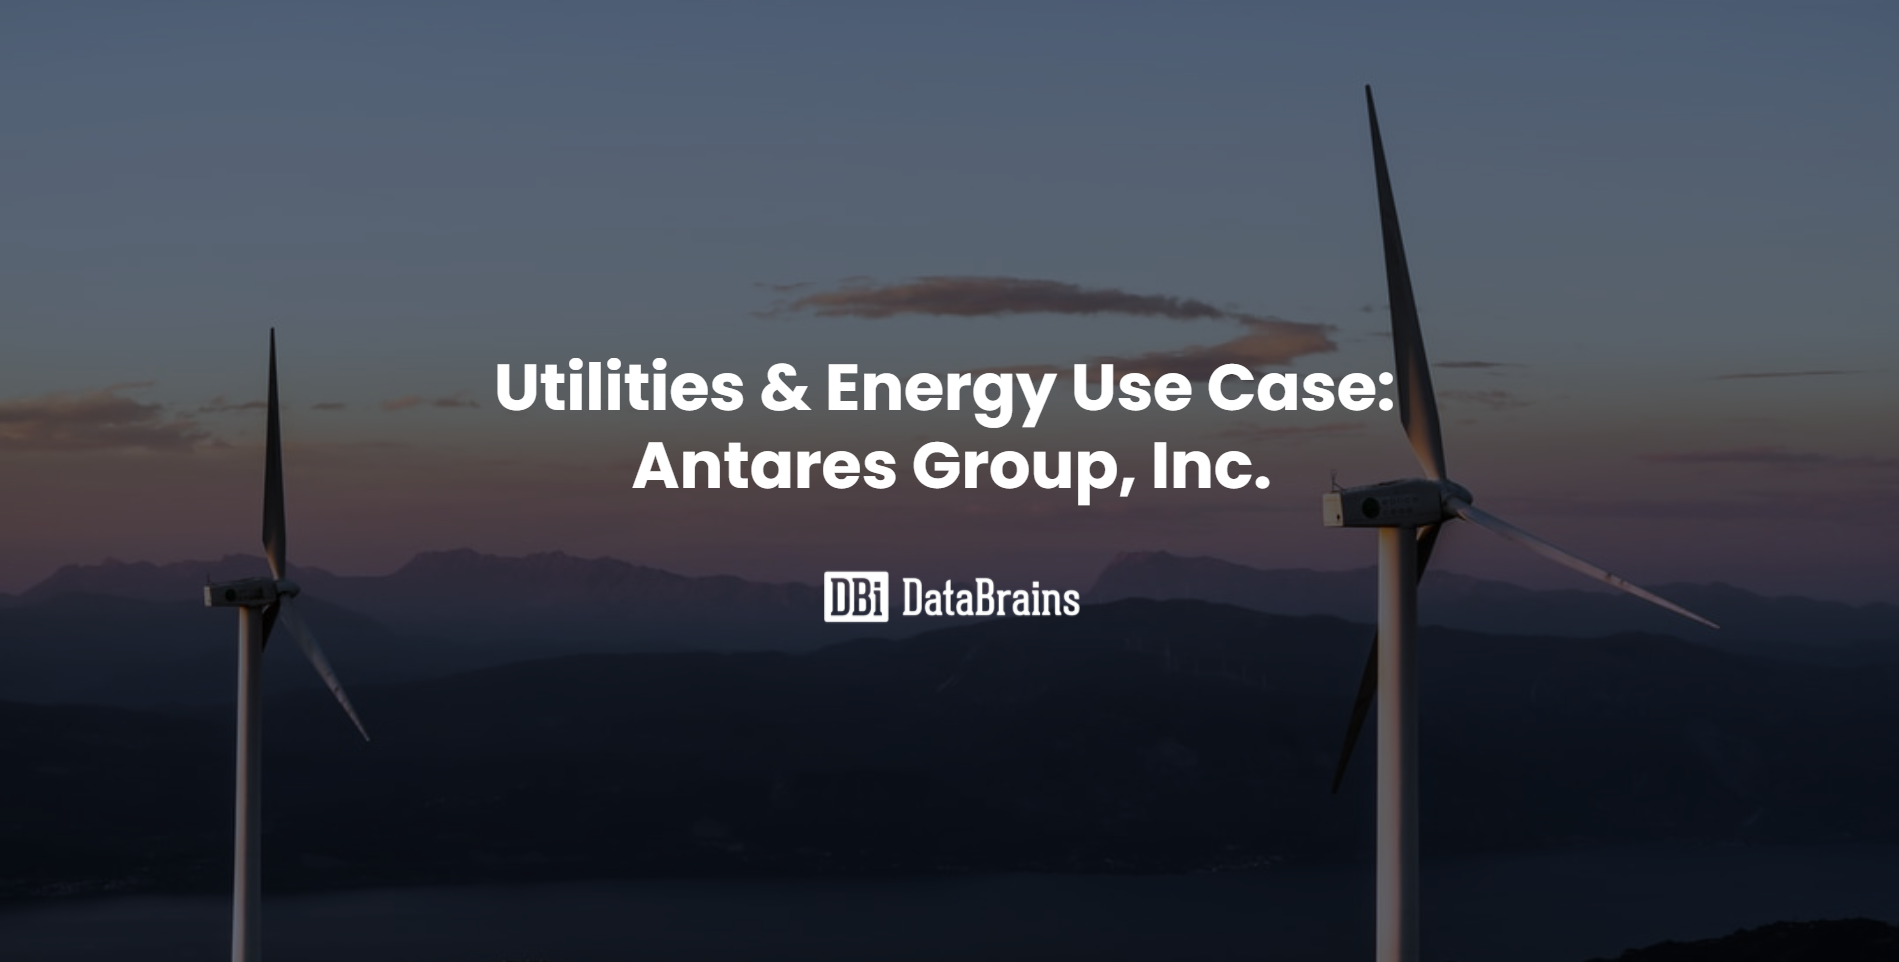 Utilities & Energy Use case: Antares Group, Inc.